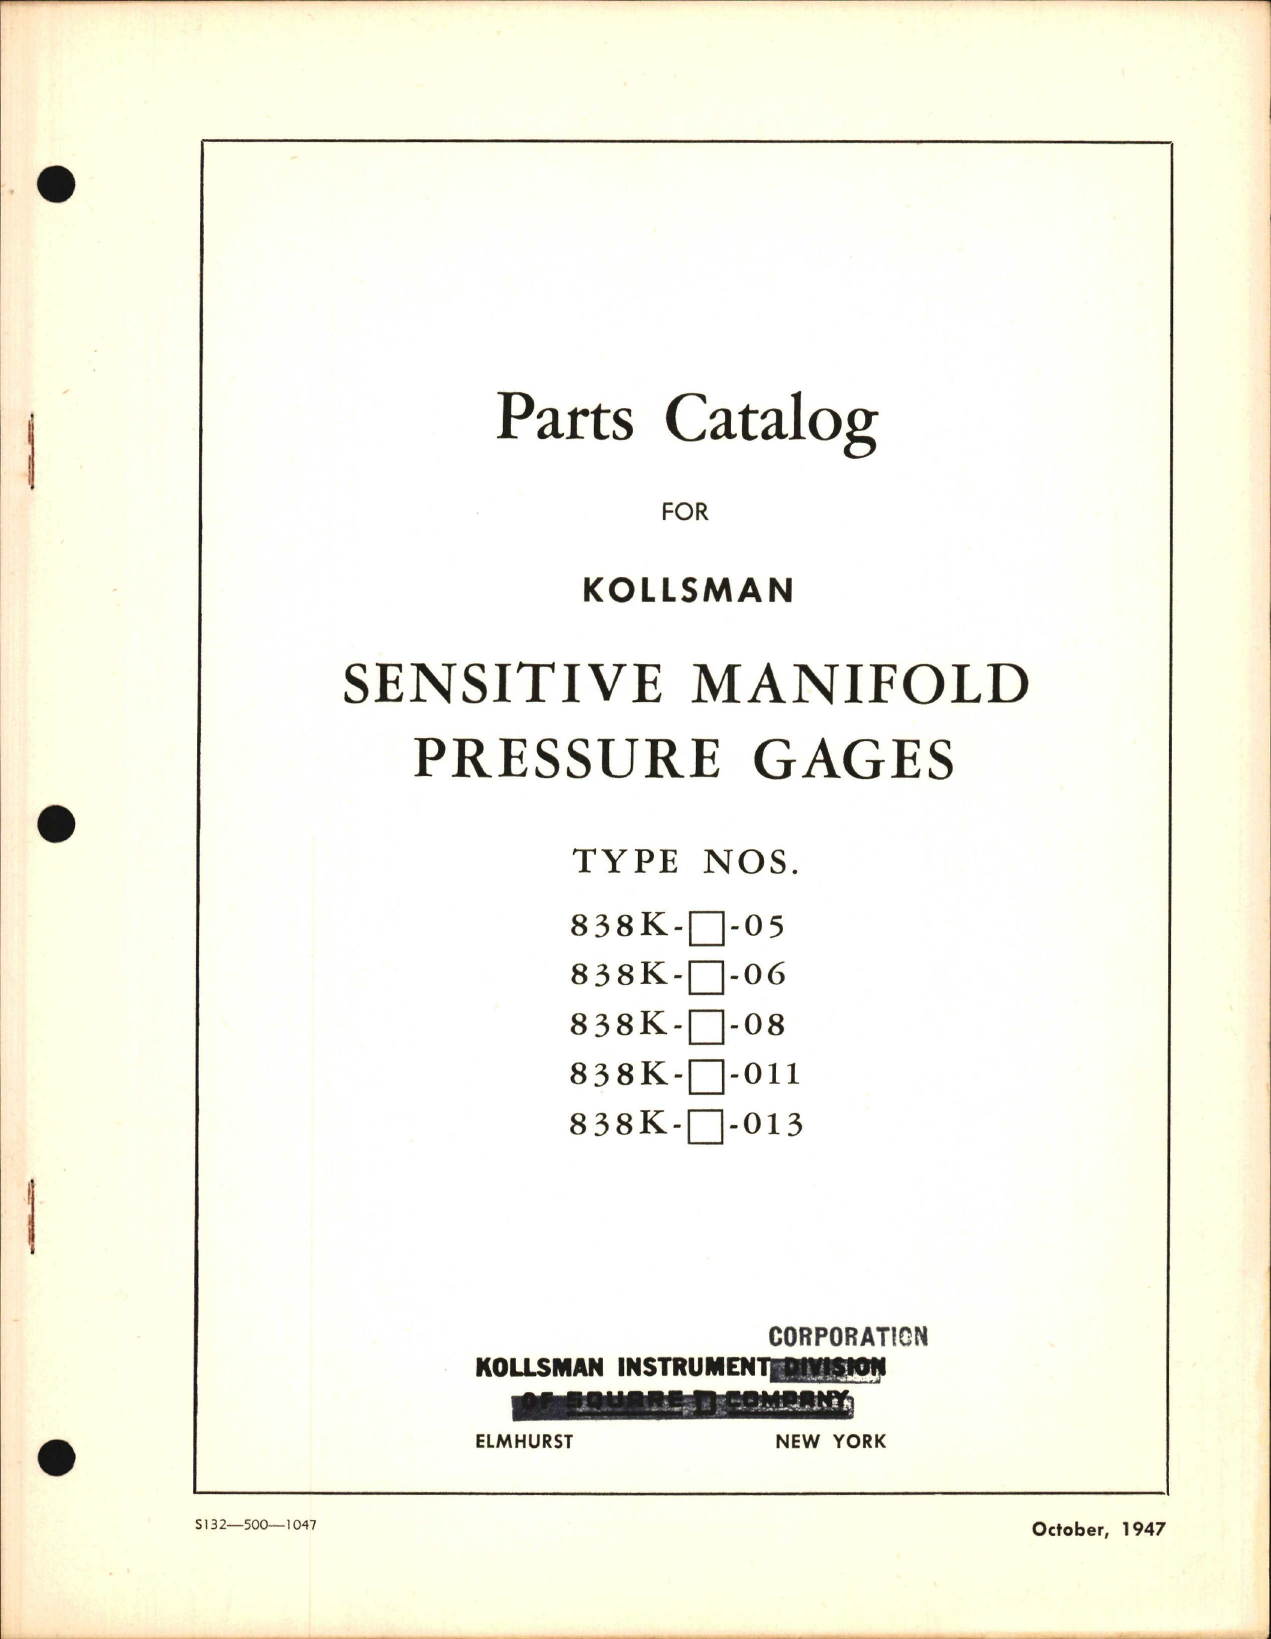 Sample page 1 from AirCorps Library document: Parts Catalog for Kollsman Sensitive Manifold Pressure Gages